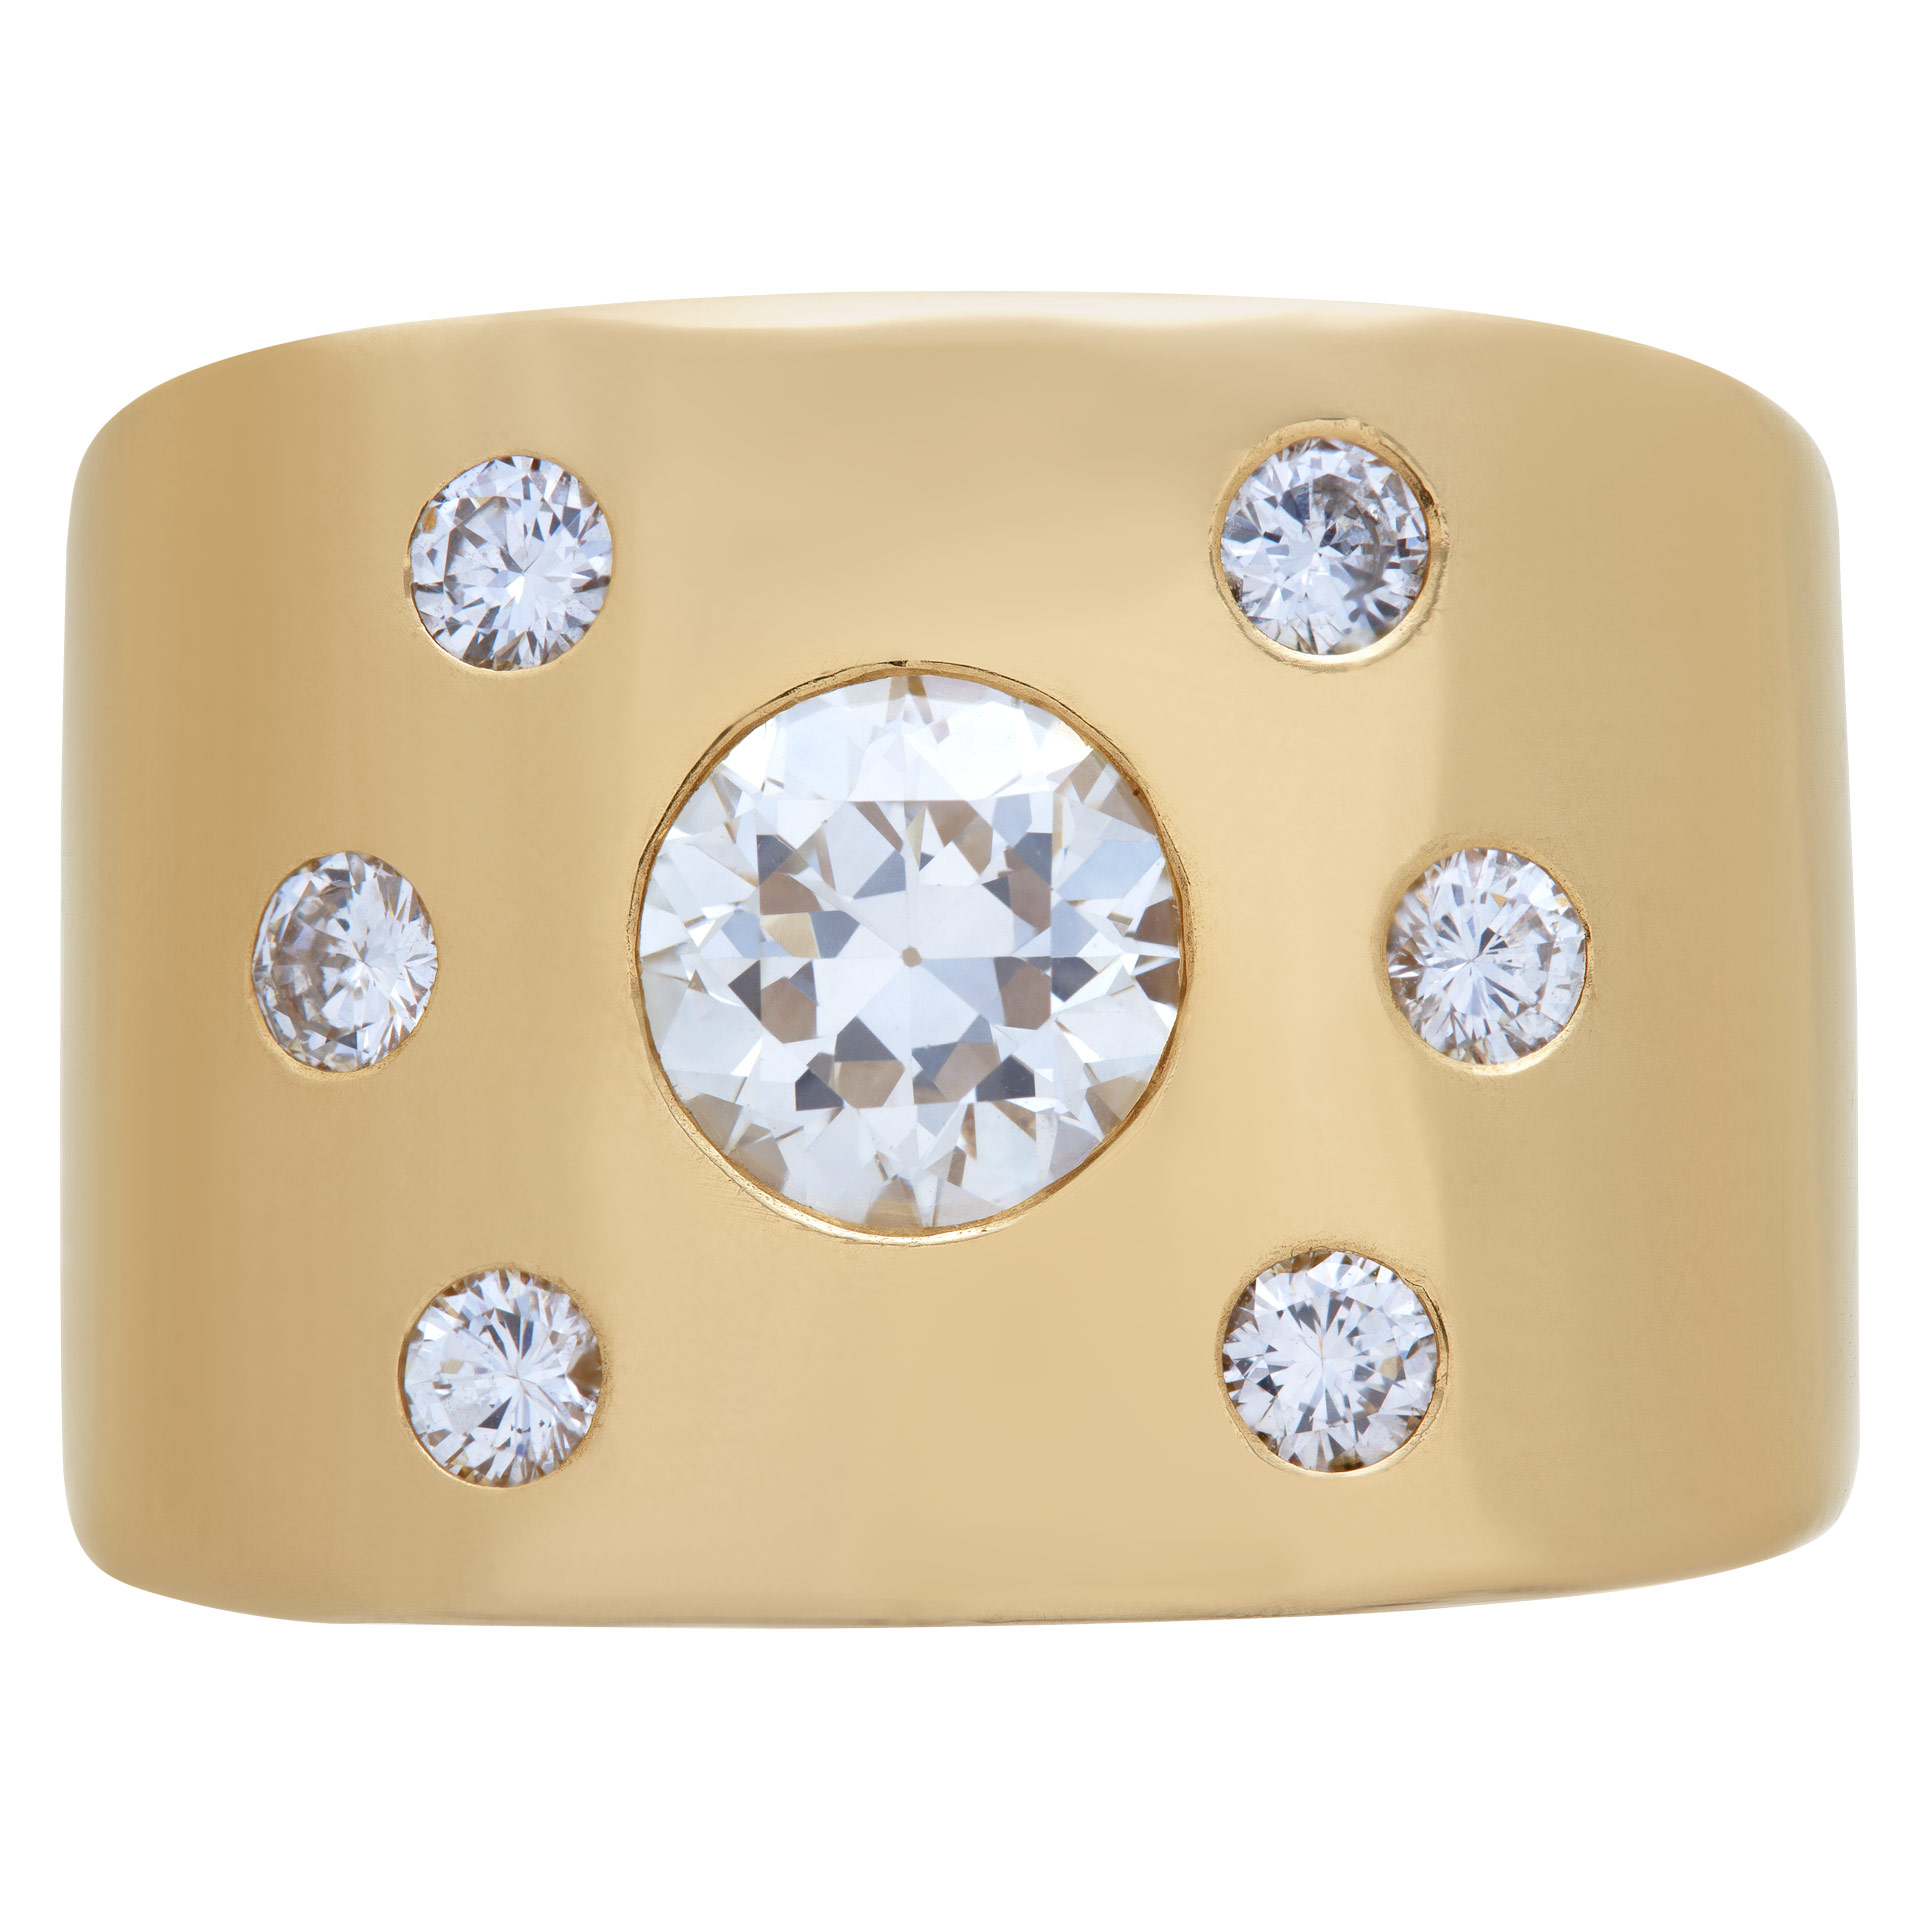 Wide diamonds ring in solid 14k yellow gold. Round brilliant cut diamonds total approx. weight: 1.42 carat,` image 1